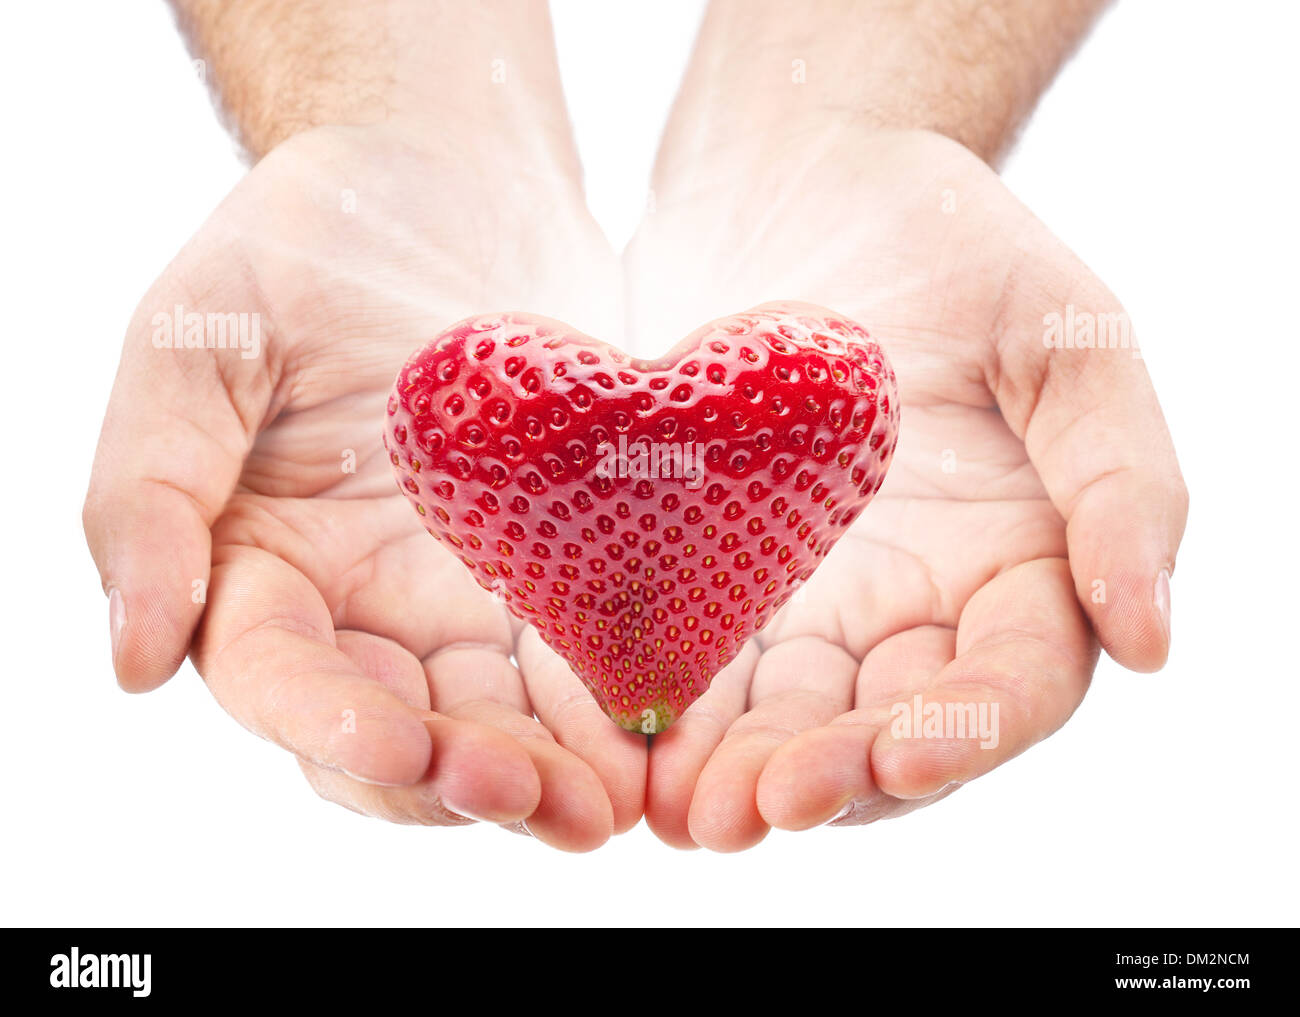 Strawberry in the shape of heart in male hands. Stock Photo